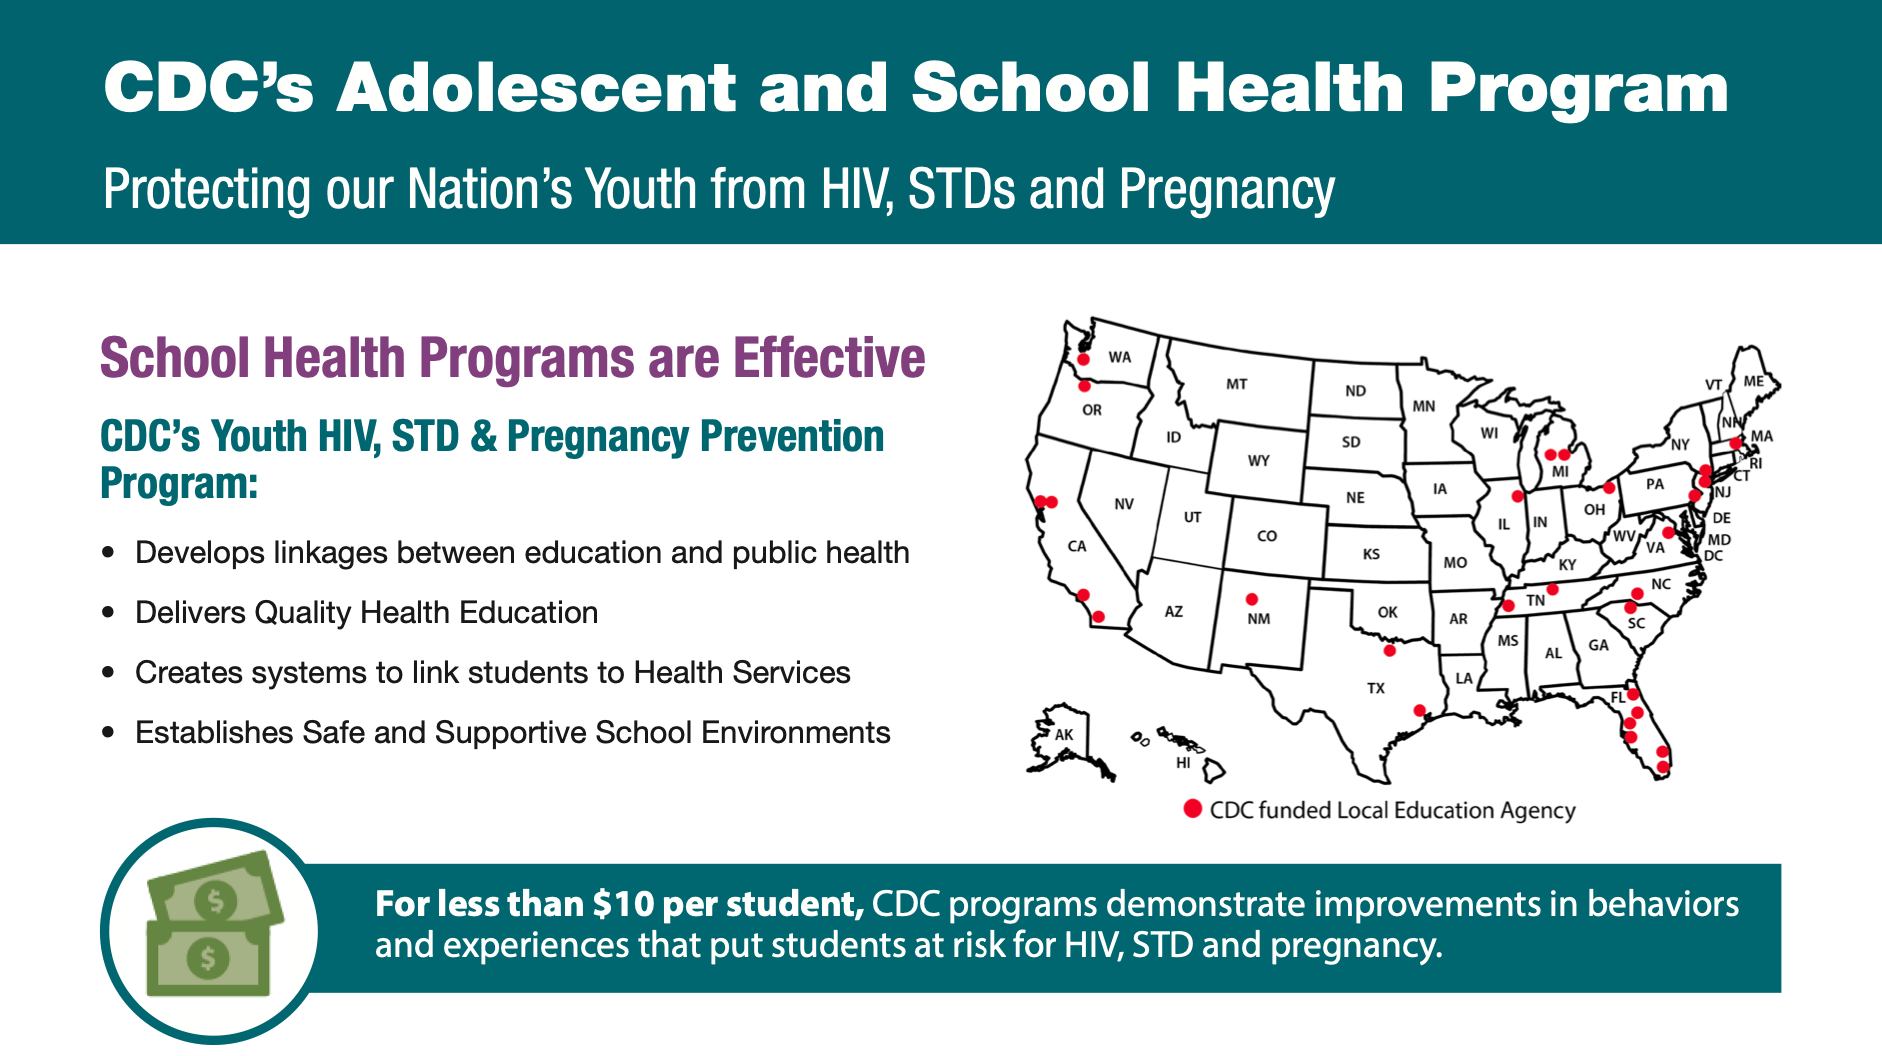 CDC’s Adolescent and School Health Program: Protecting our Nation’s Youth from HIV, STDs, and Pregnancy